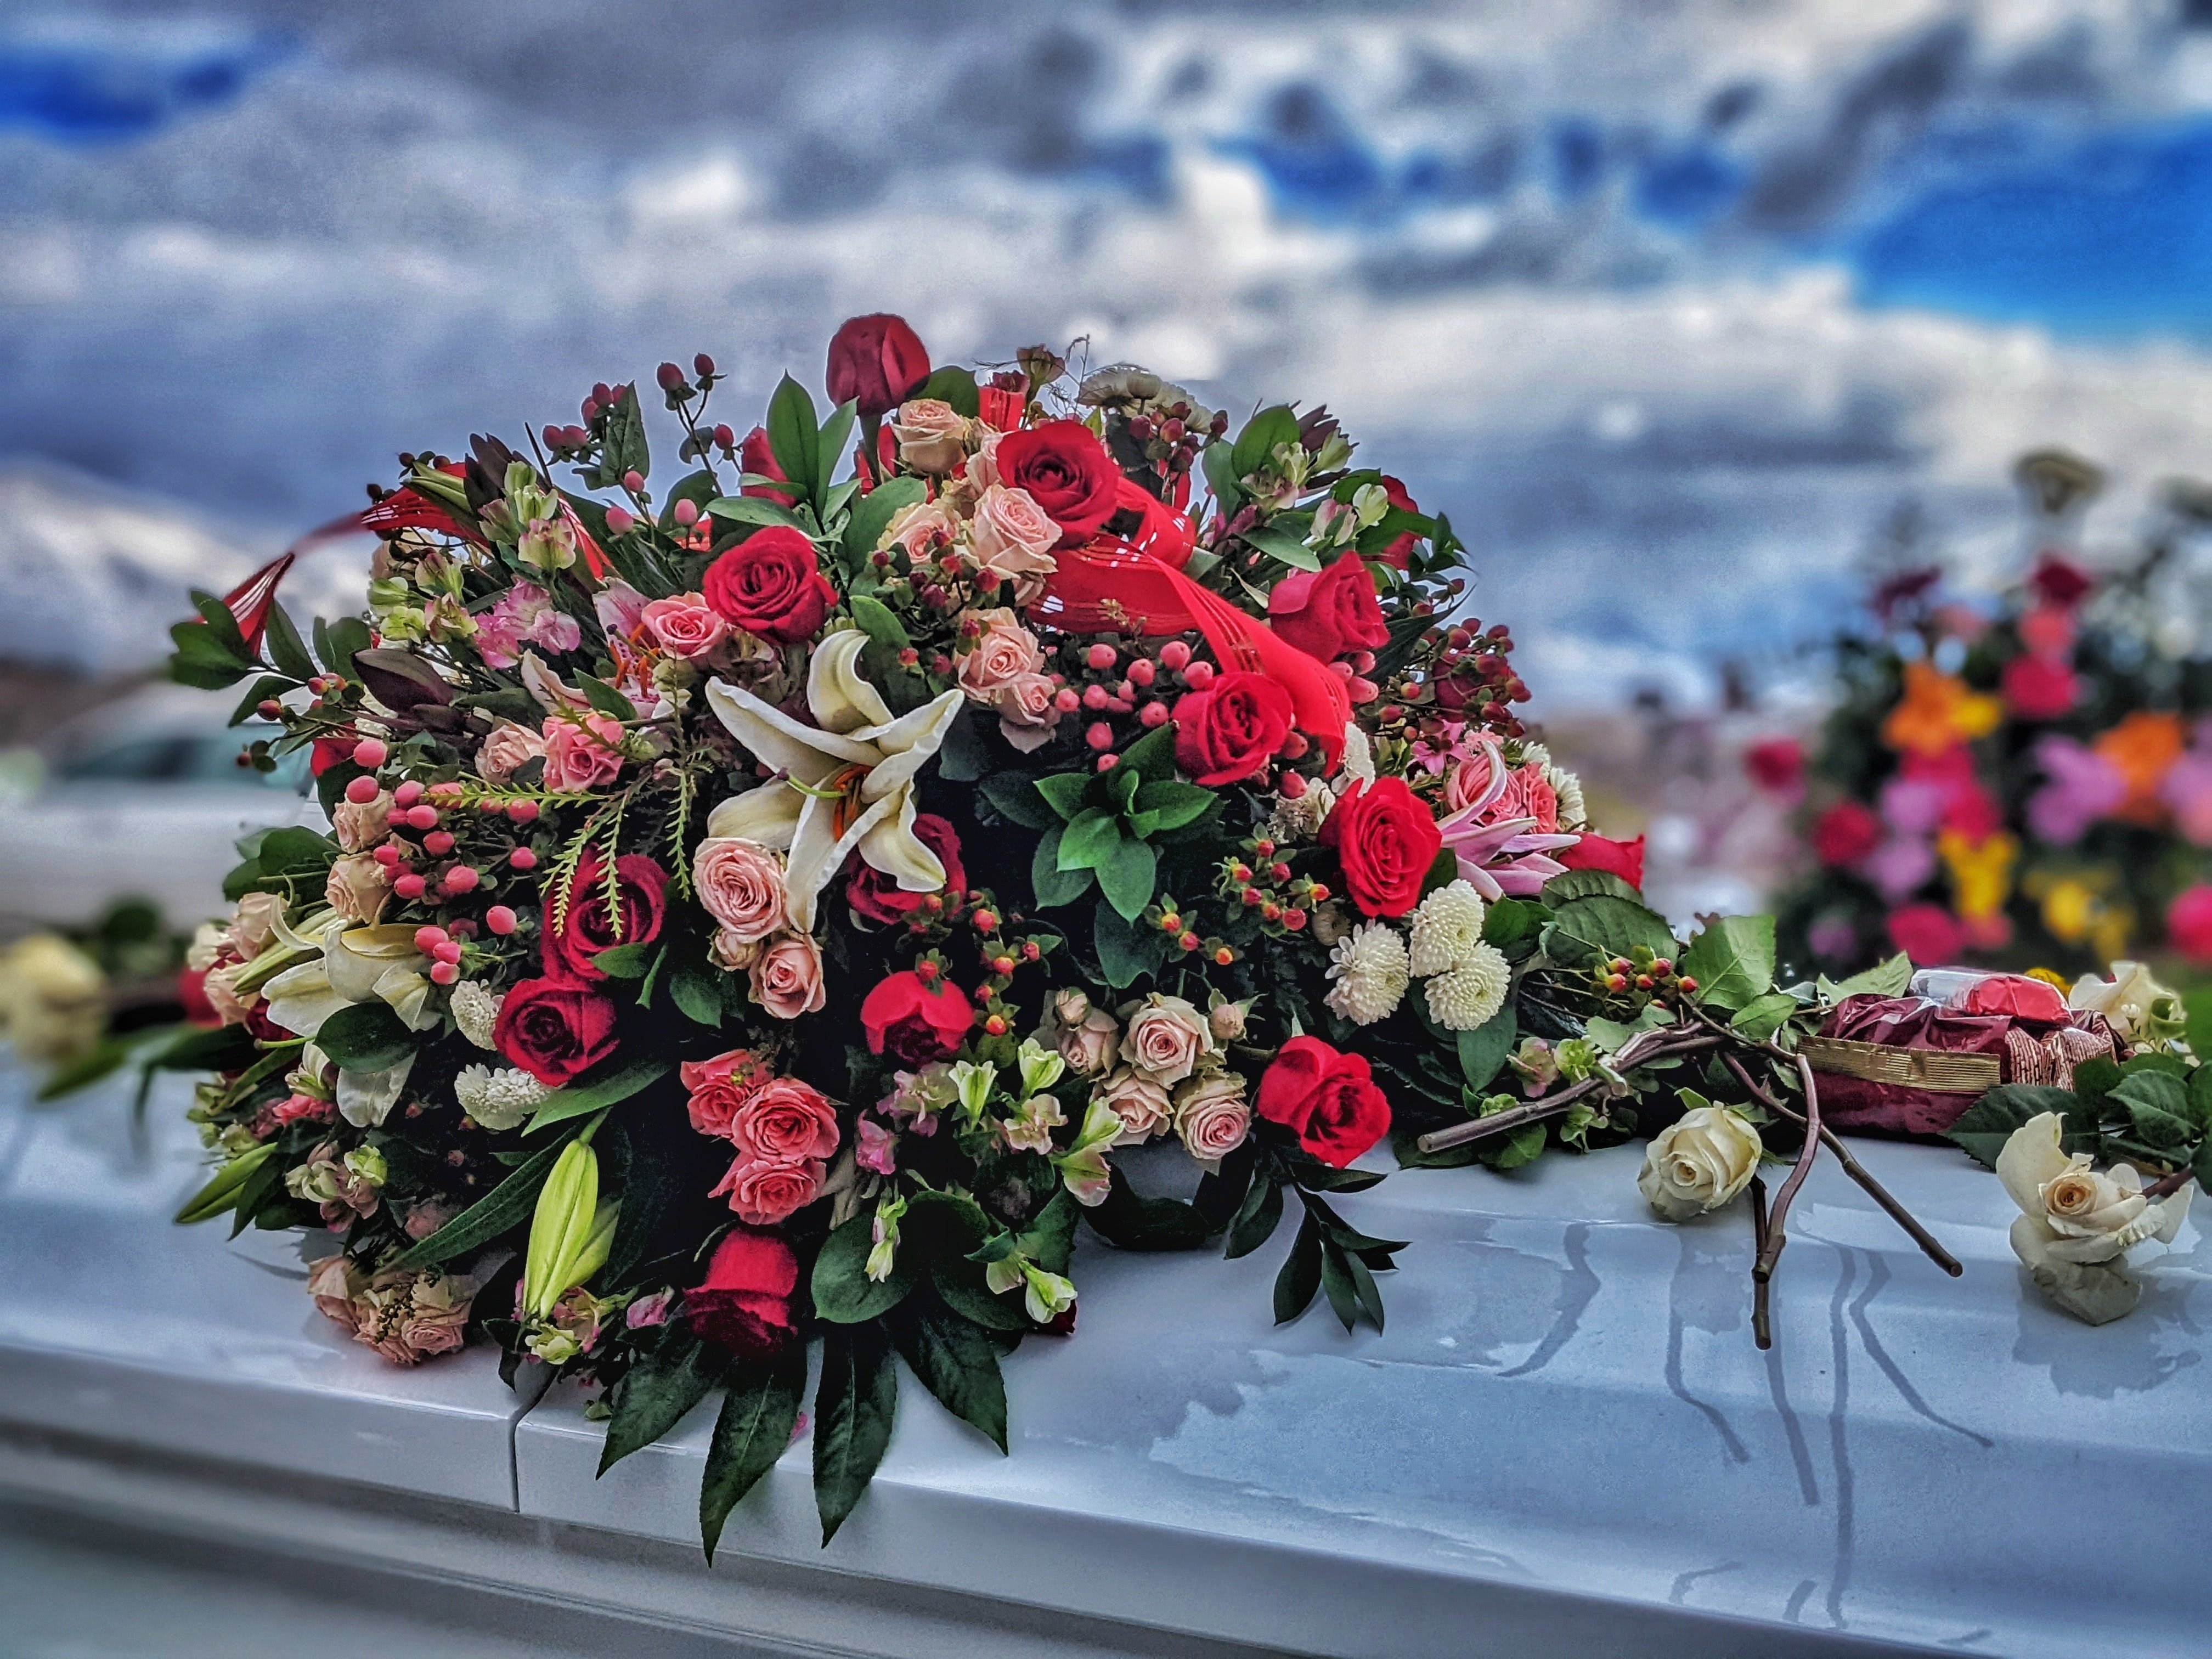 Sam and his family placed flowers on his mothe'r grave. | Source: Unsplash